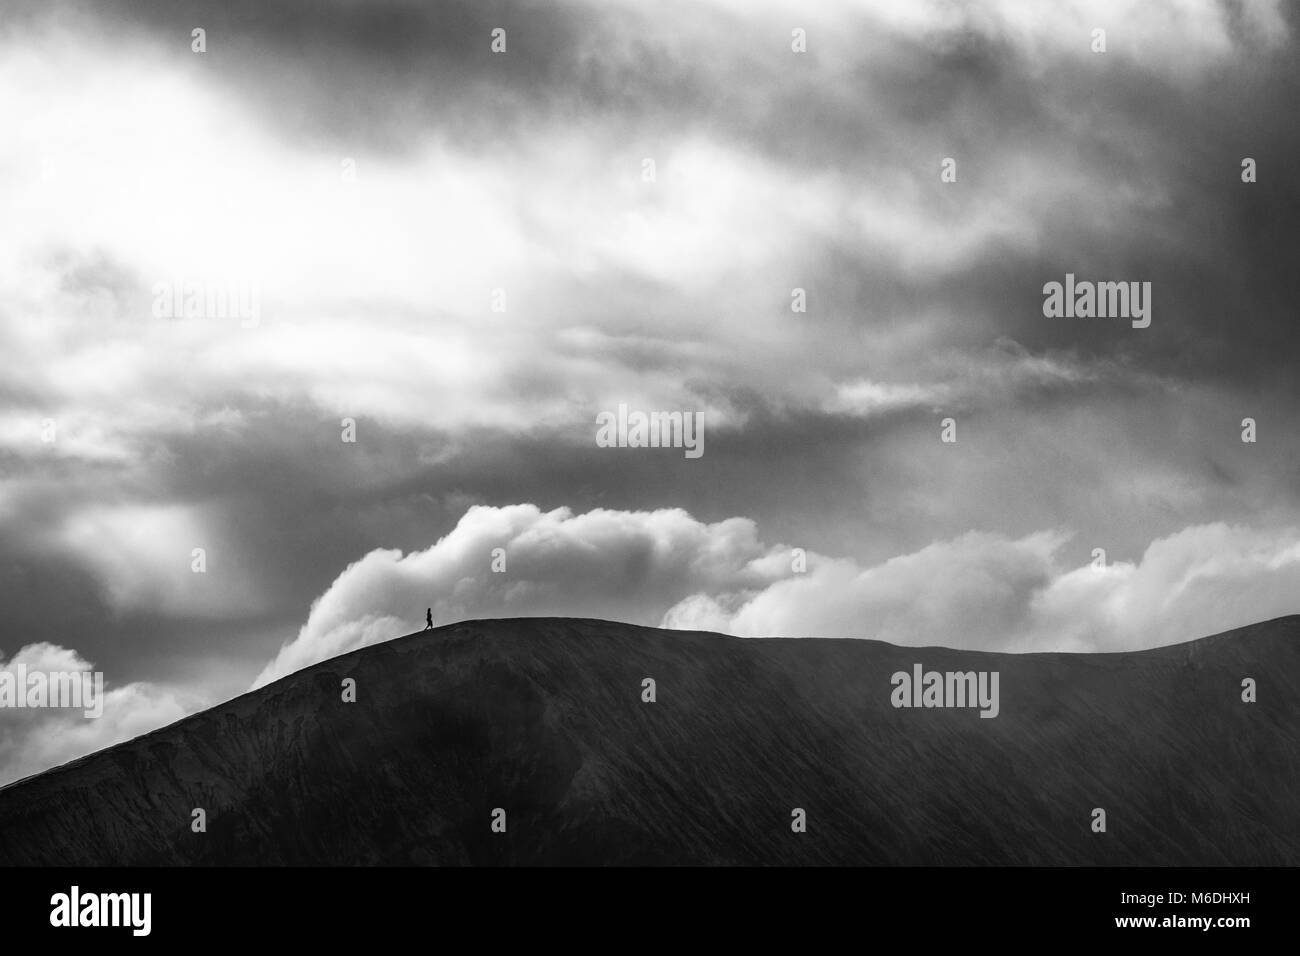 A black and white timeless capture of a person walking on the crater of massive Mount Bromo volcano under the heavy clouds Stock Photo